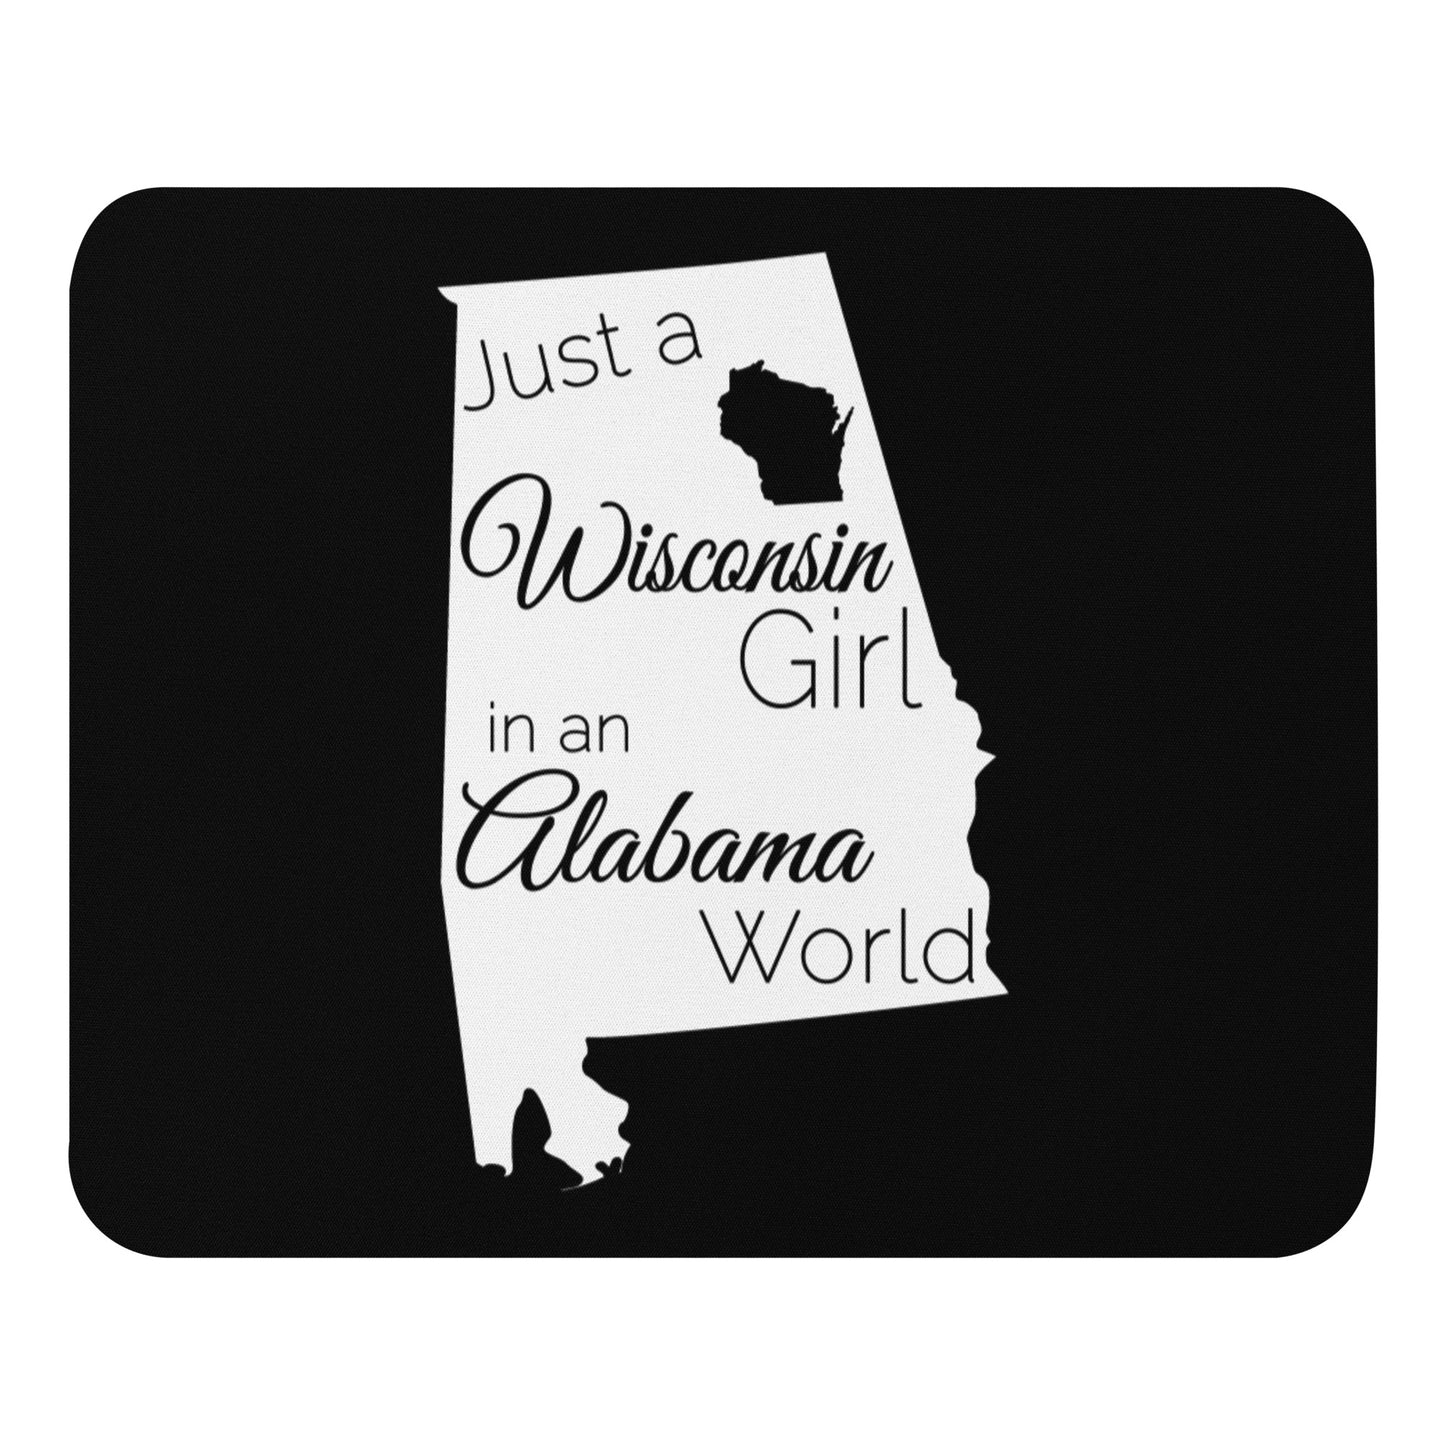 Just a Wisconsin Girl in an Alabama World Mouse pad